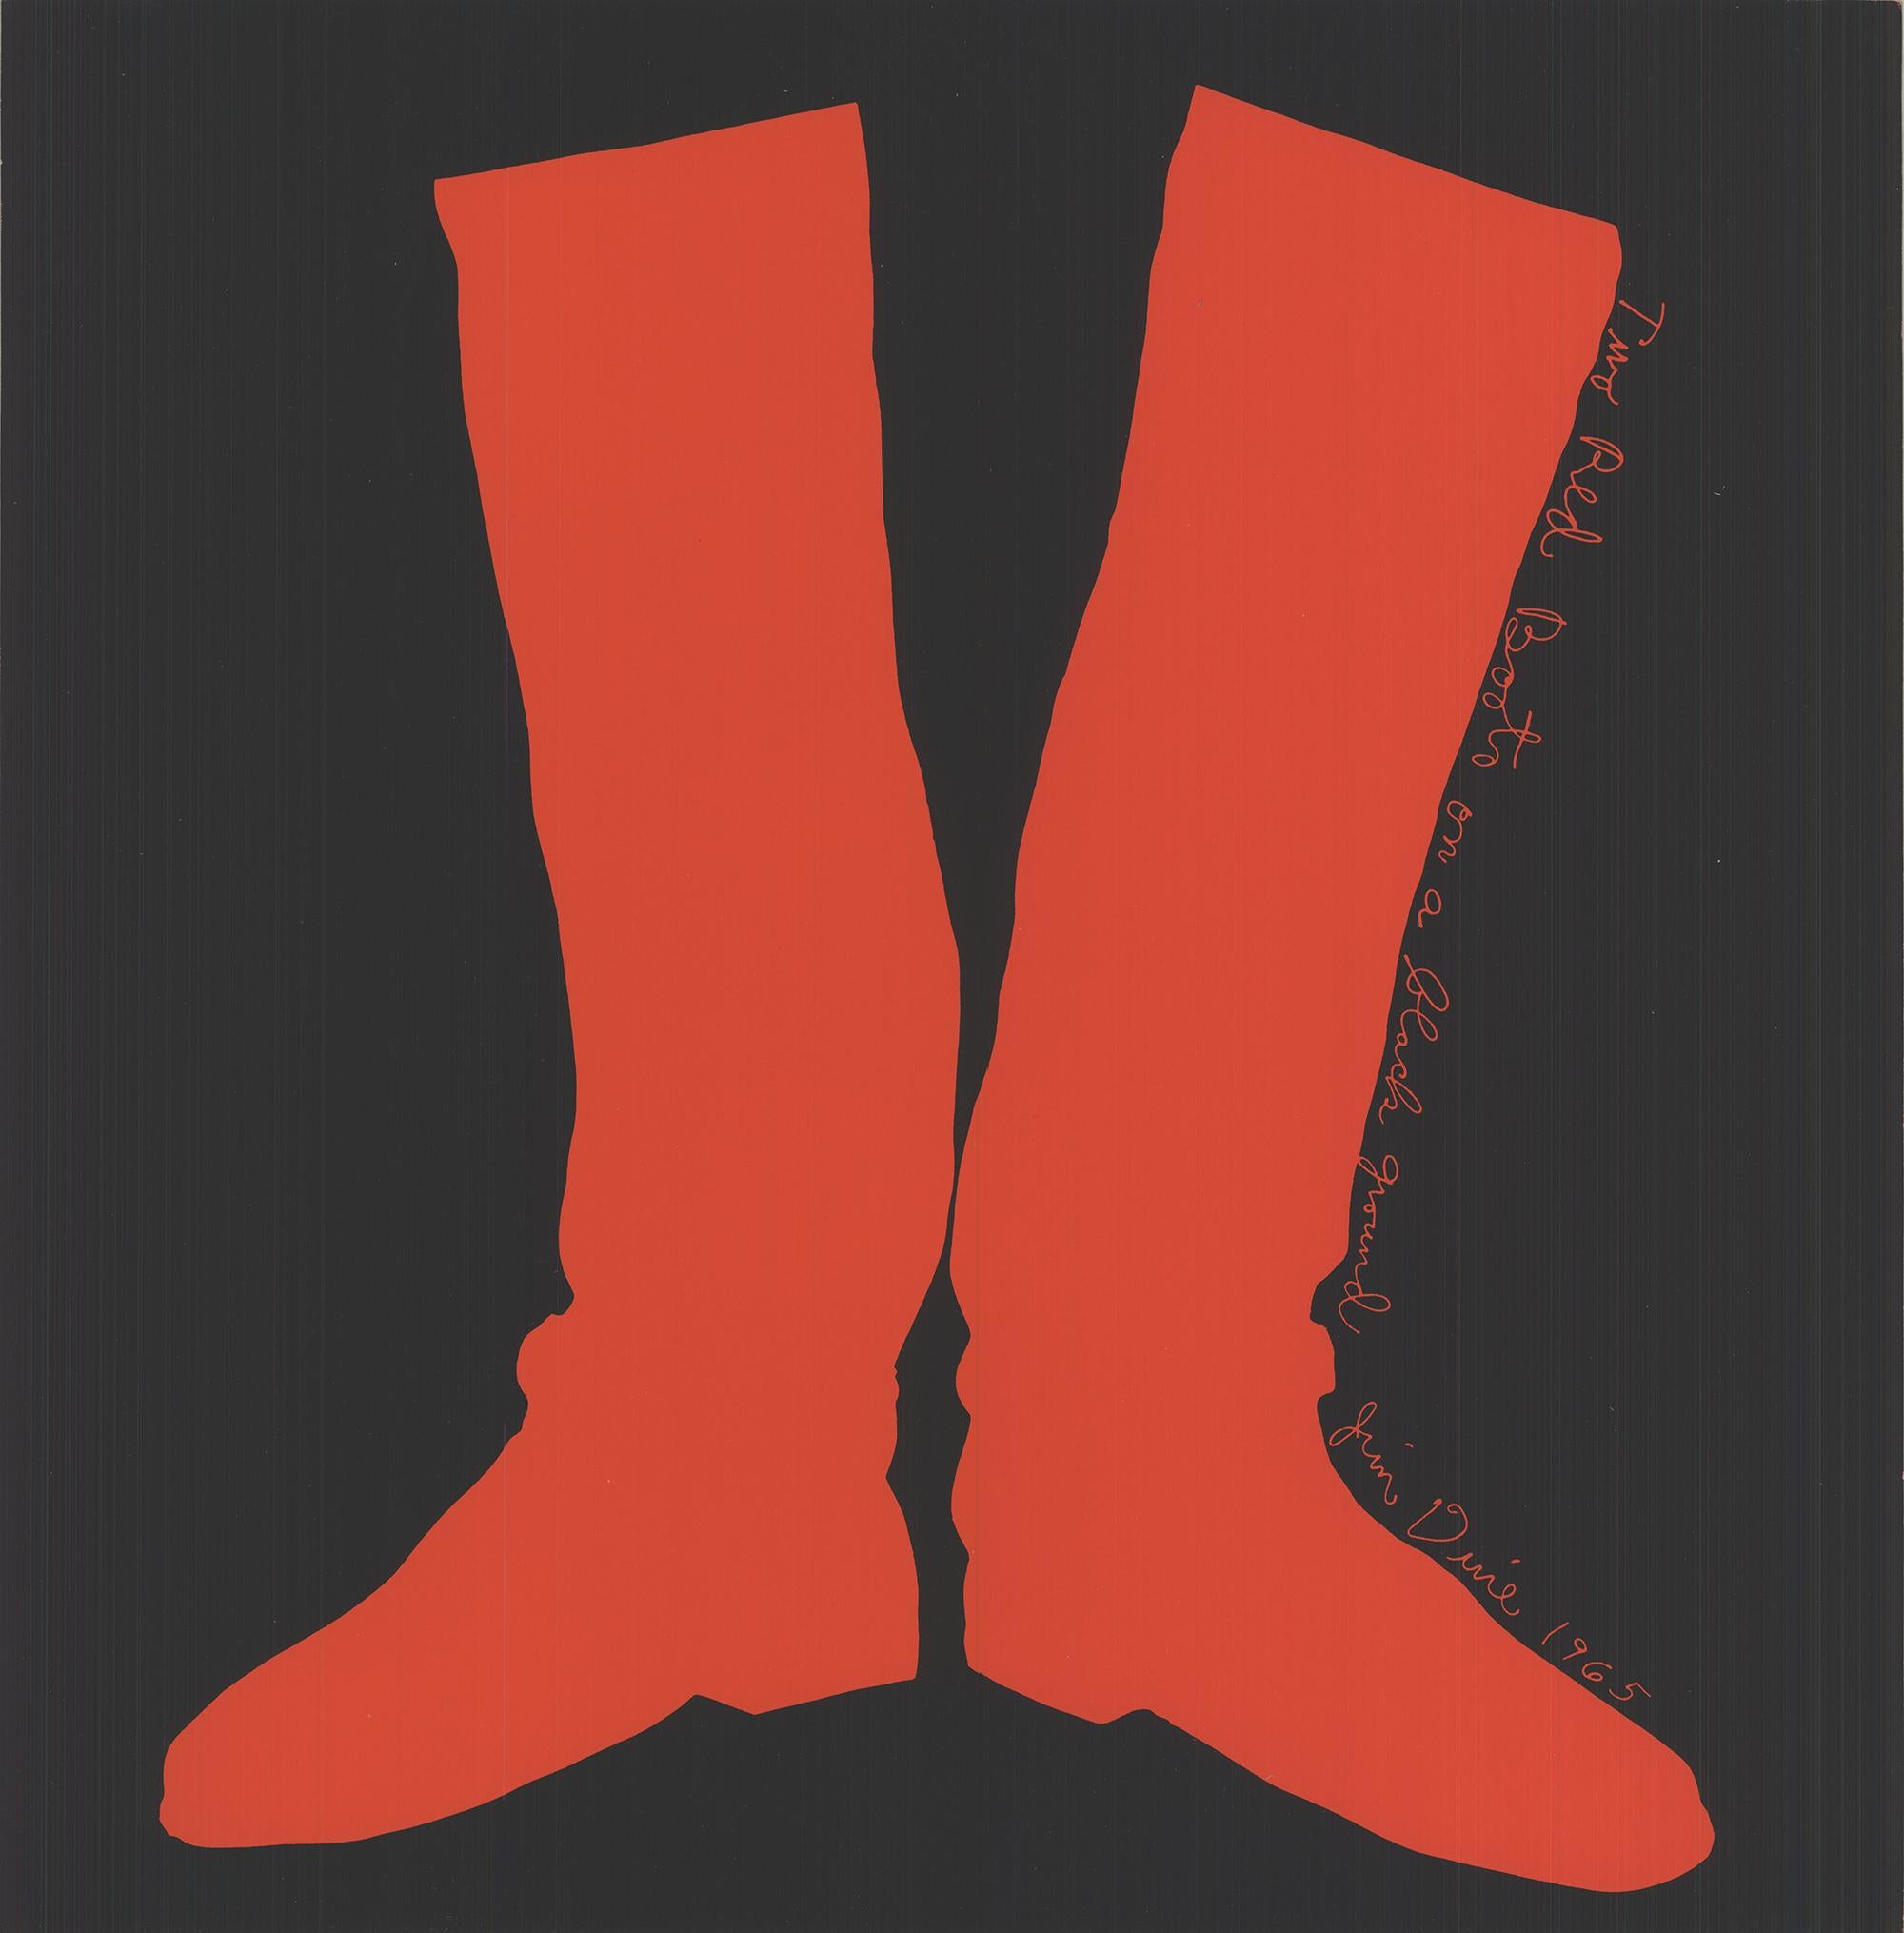 The Red Boots on a Black Ground, 1968 ORIGINAL SERIGRAPH - Print by Jim Dine